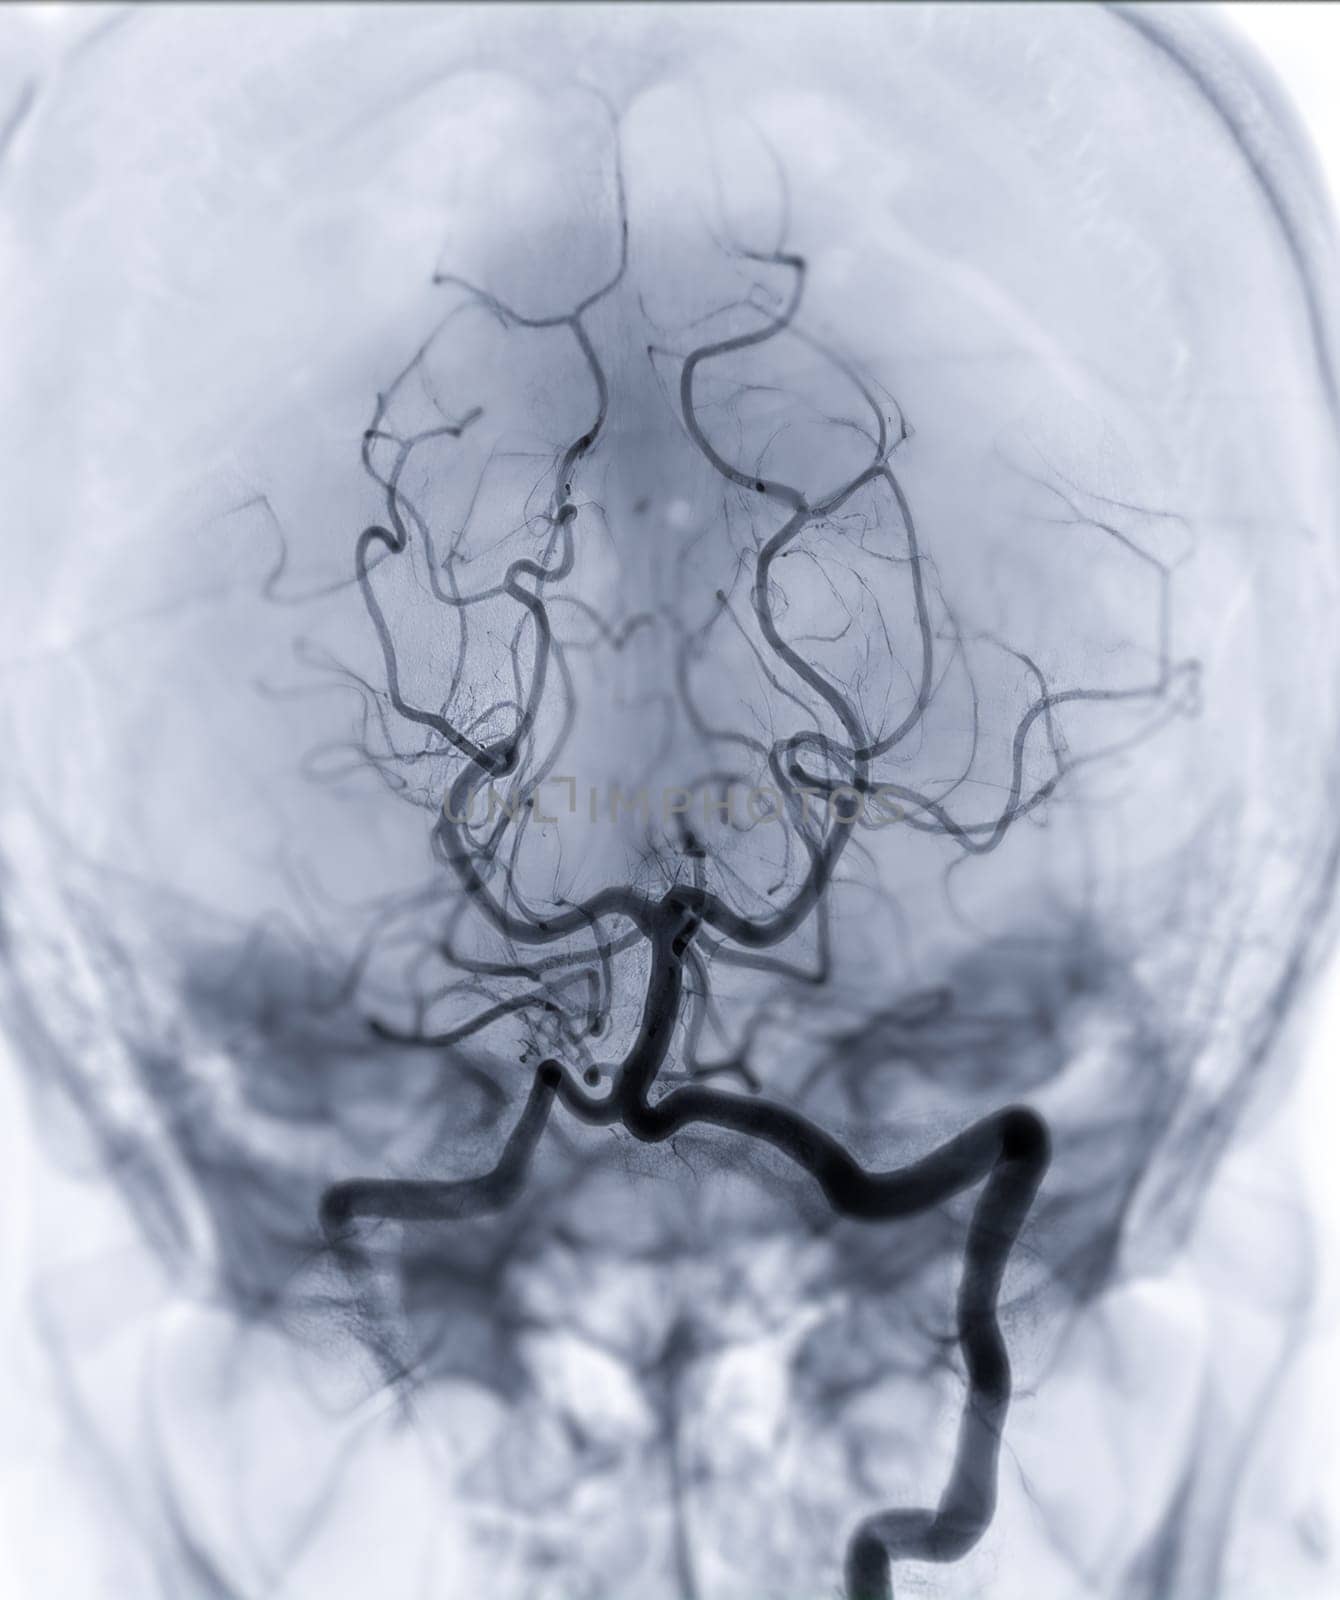 Cerebral angiography  imageor potesterior cerebral artery from Fluoroscopy in intervention radiology  showing Basilar artery.